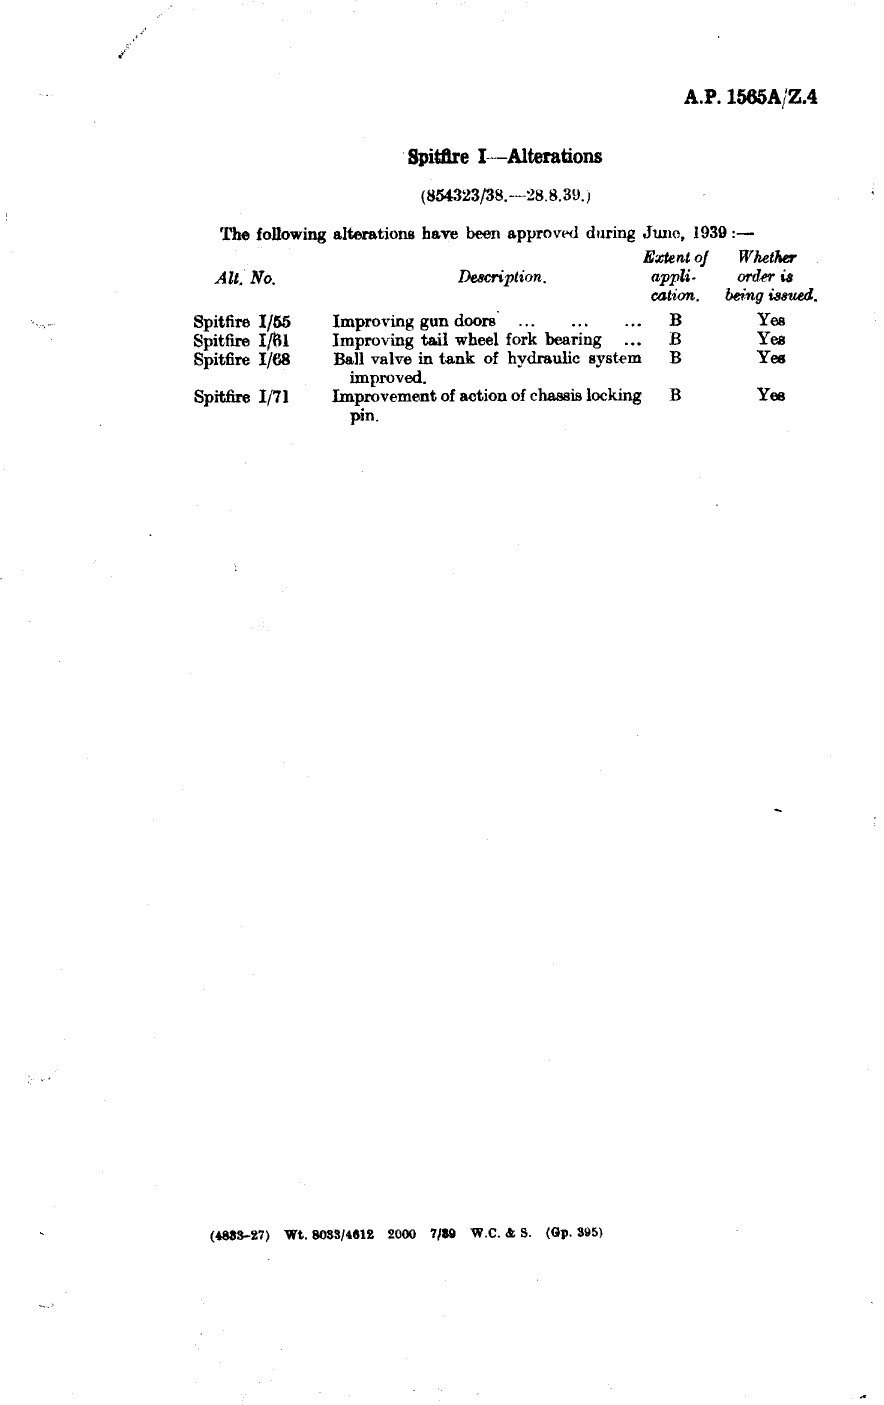 Sample page 1 from AirCorps Library document: Spitfire I Alterations 55, 61, 68 and 71